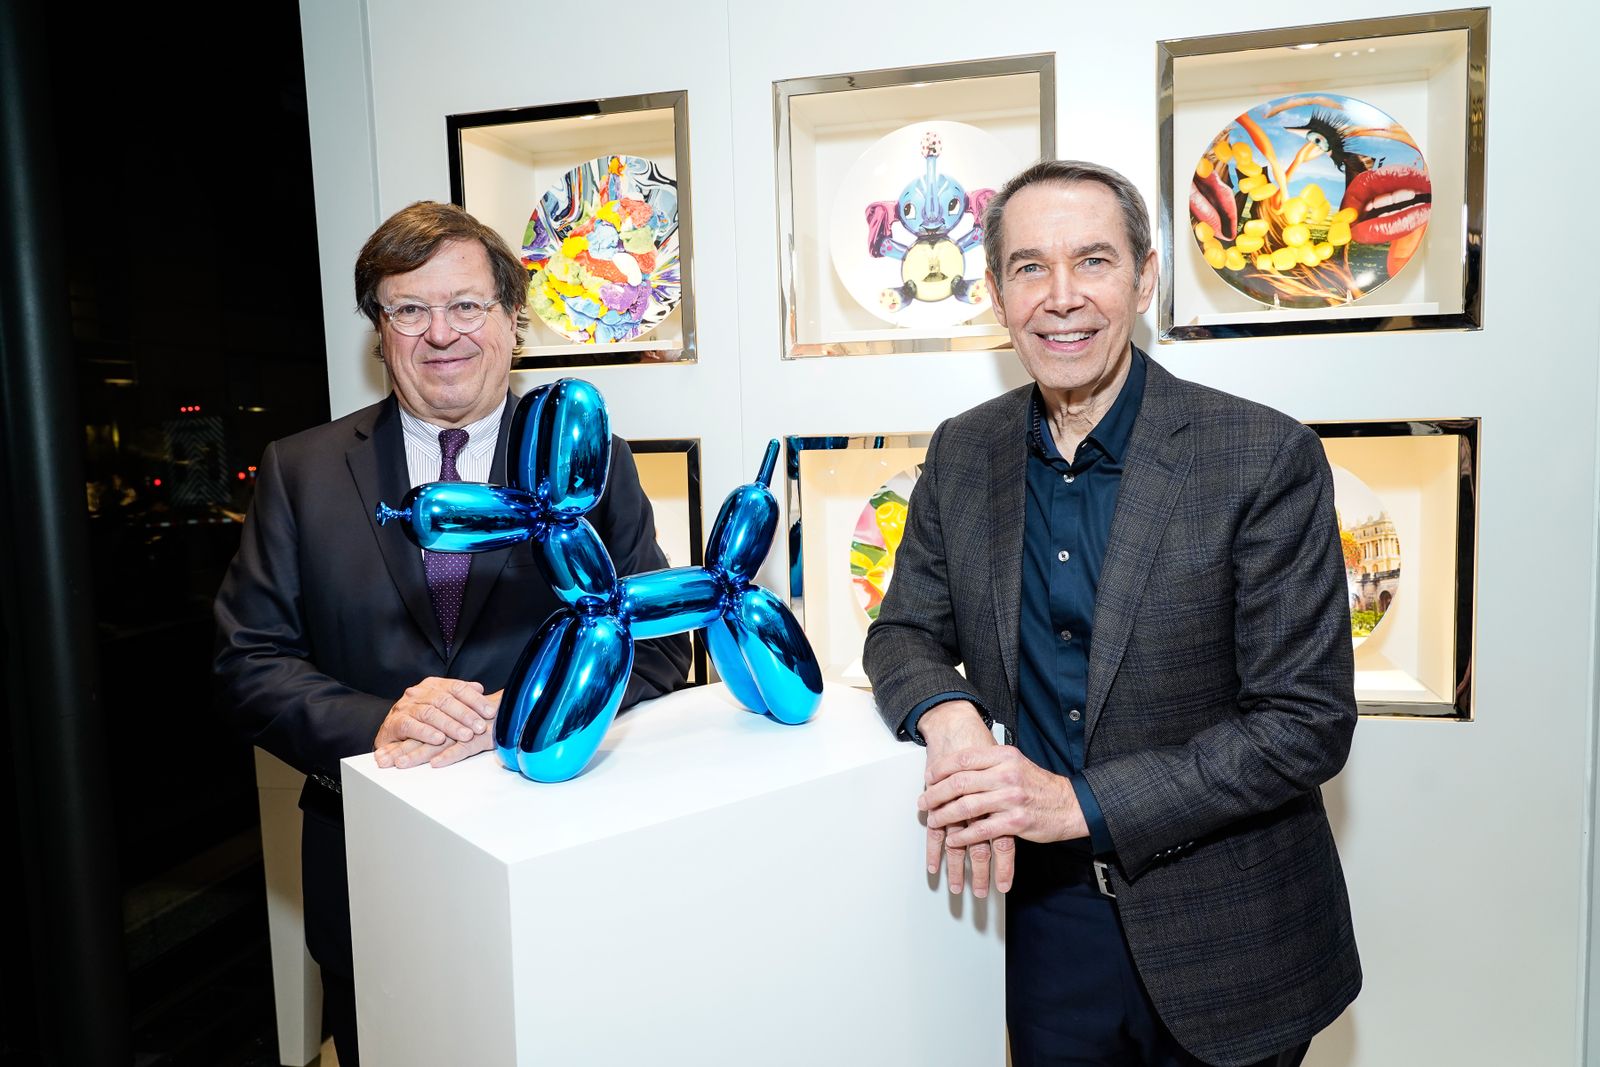 6 Artists Who Influenced The New Jeff Koons Show